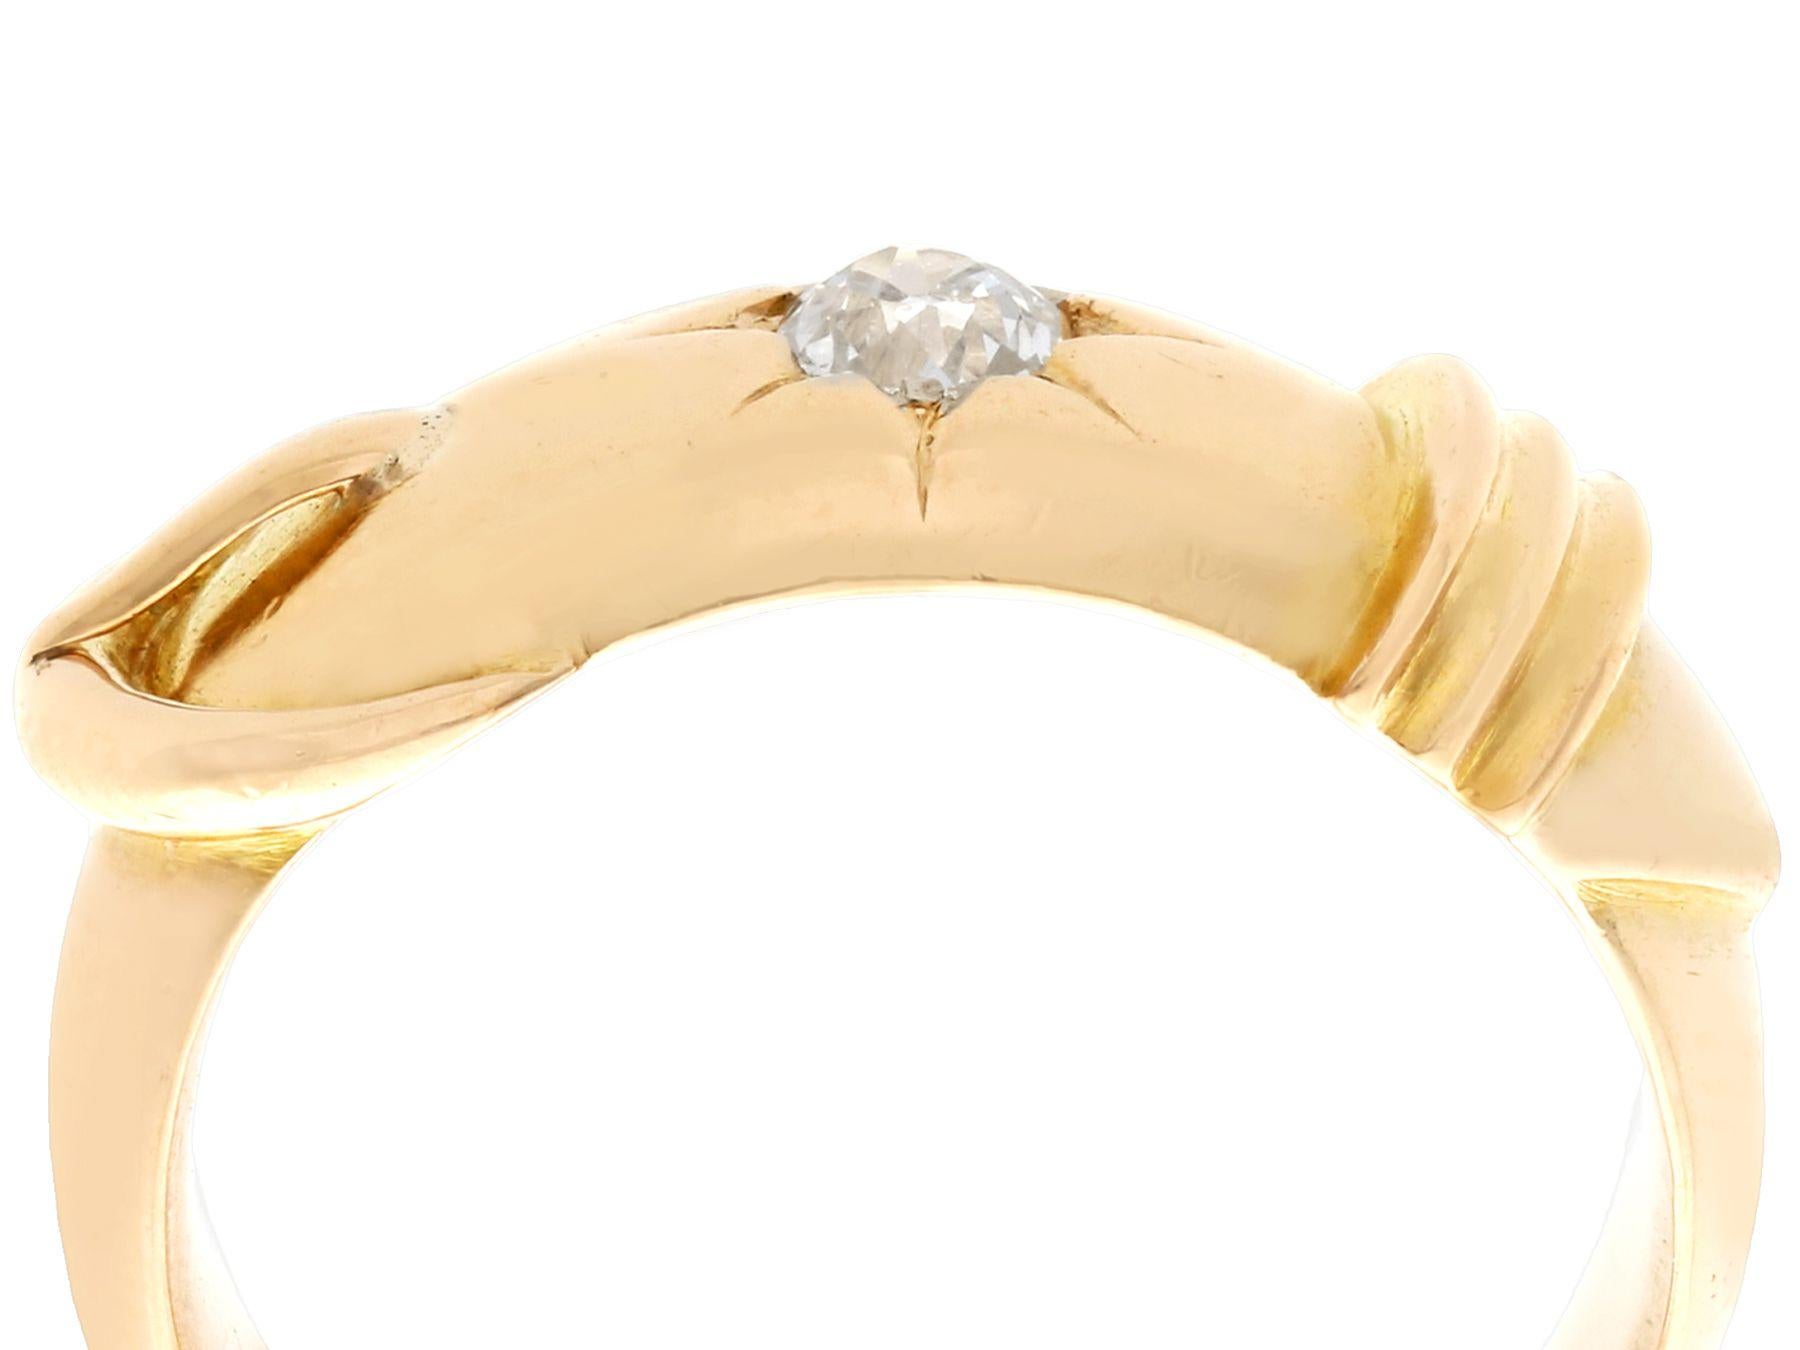 A fine and impressive antique 0.38 carat diamond and 18k yellow gold dress ring in the form of a belt and buckle; part of our diverse antique jewelry and estate jewelry collections.

This fine and impressive diamond buckle ring has been crafted in